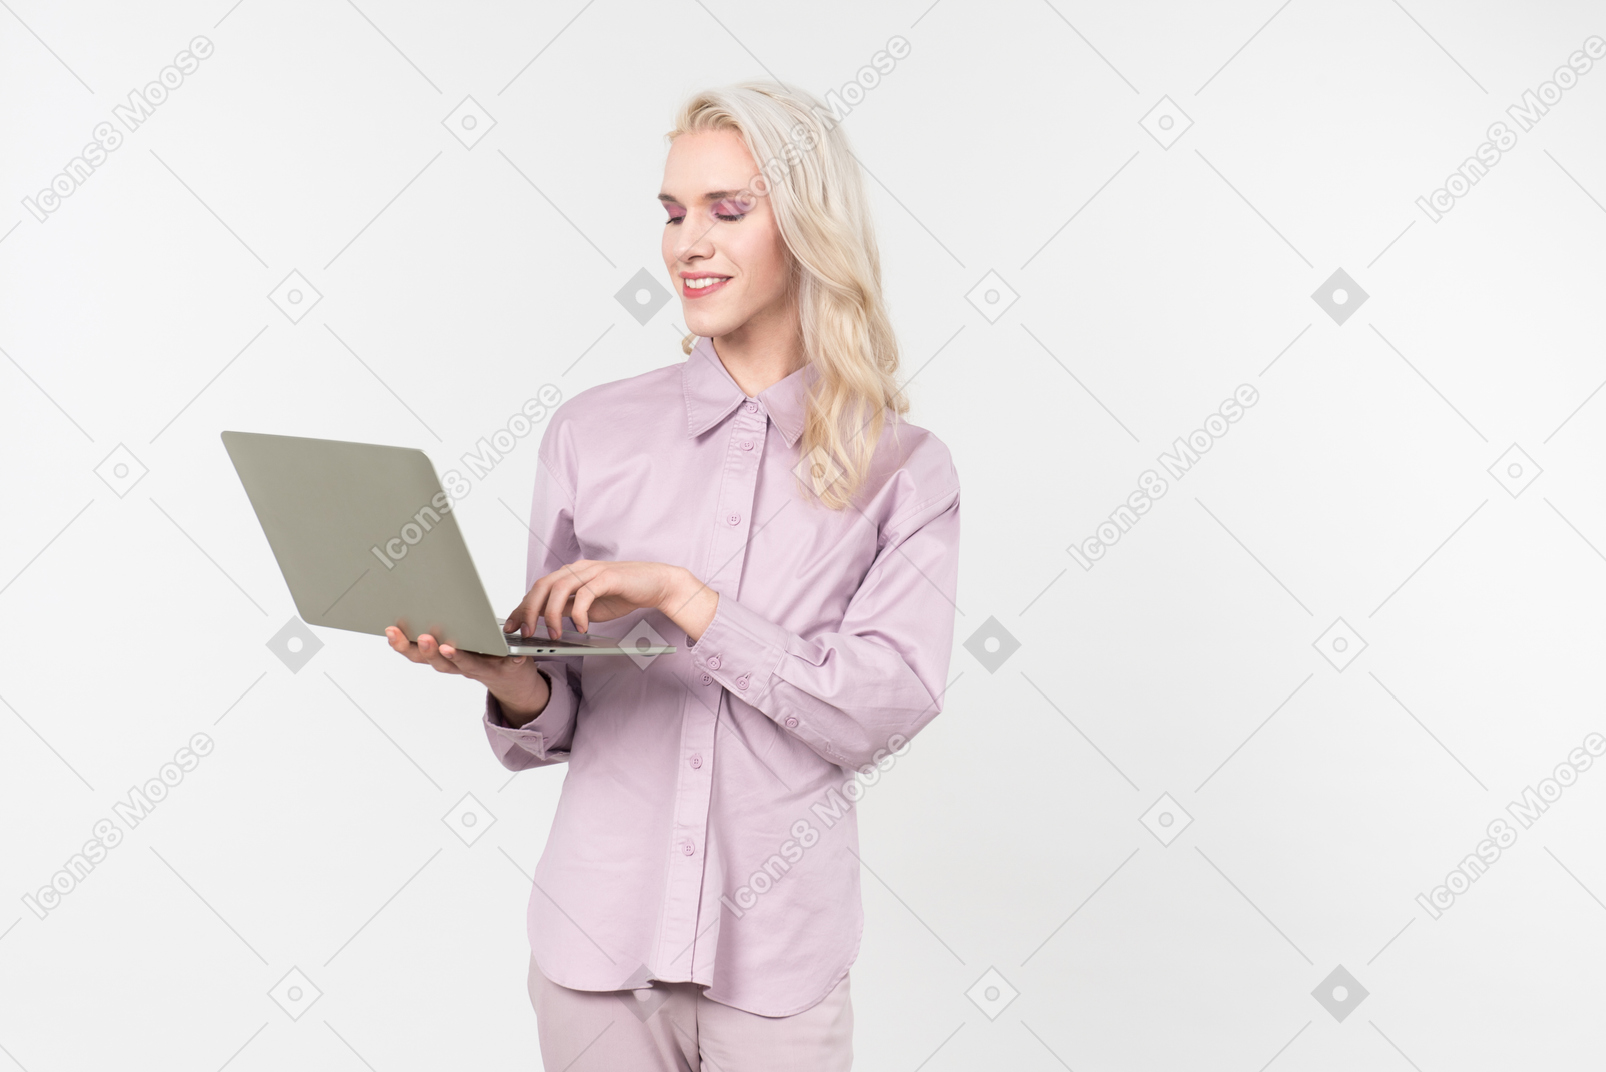 Young blond-haired person in pastel clothes and with a laptop in their hand, communicating with someone through the internet, standing against a plain white background